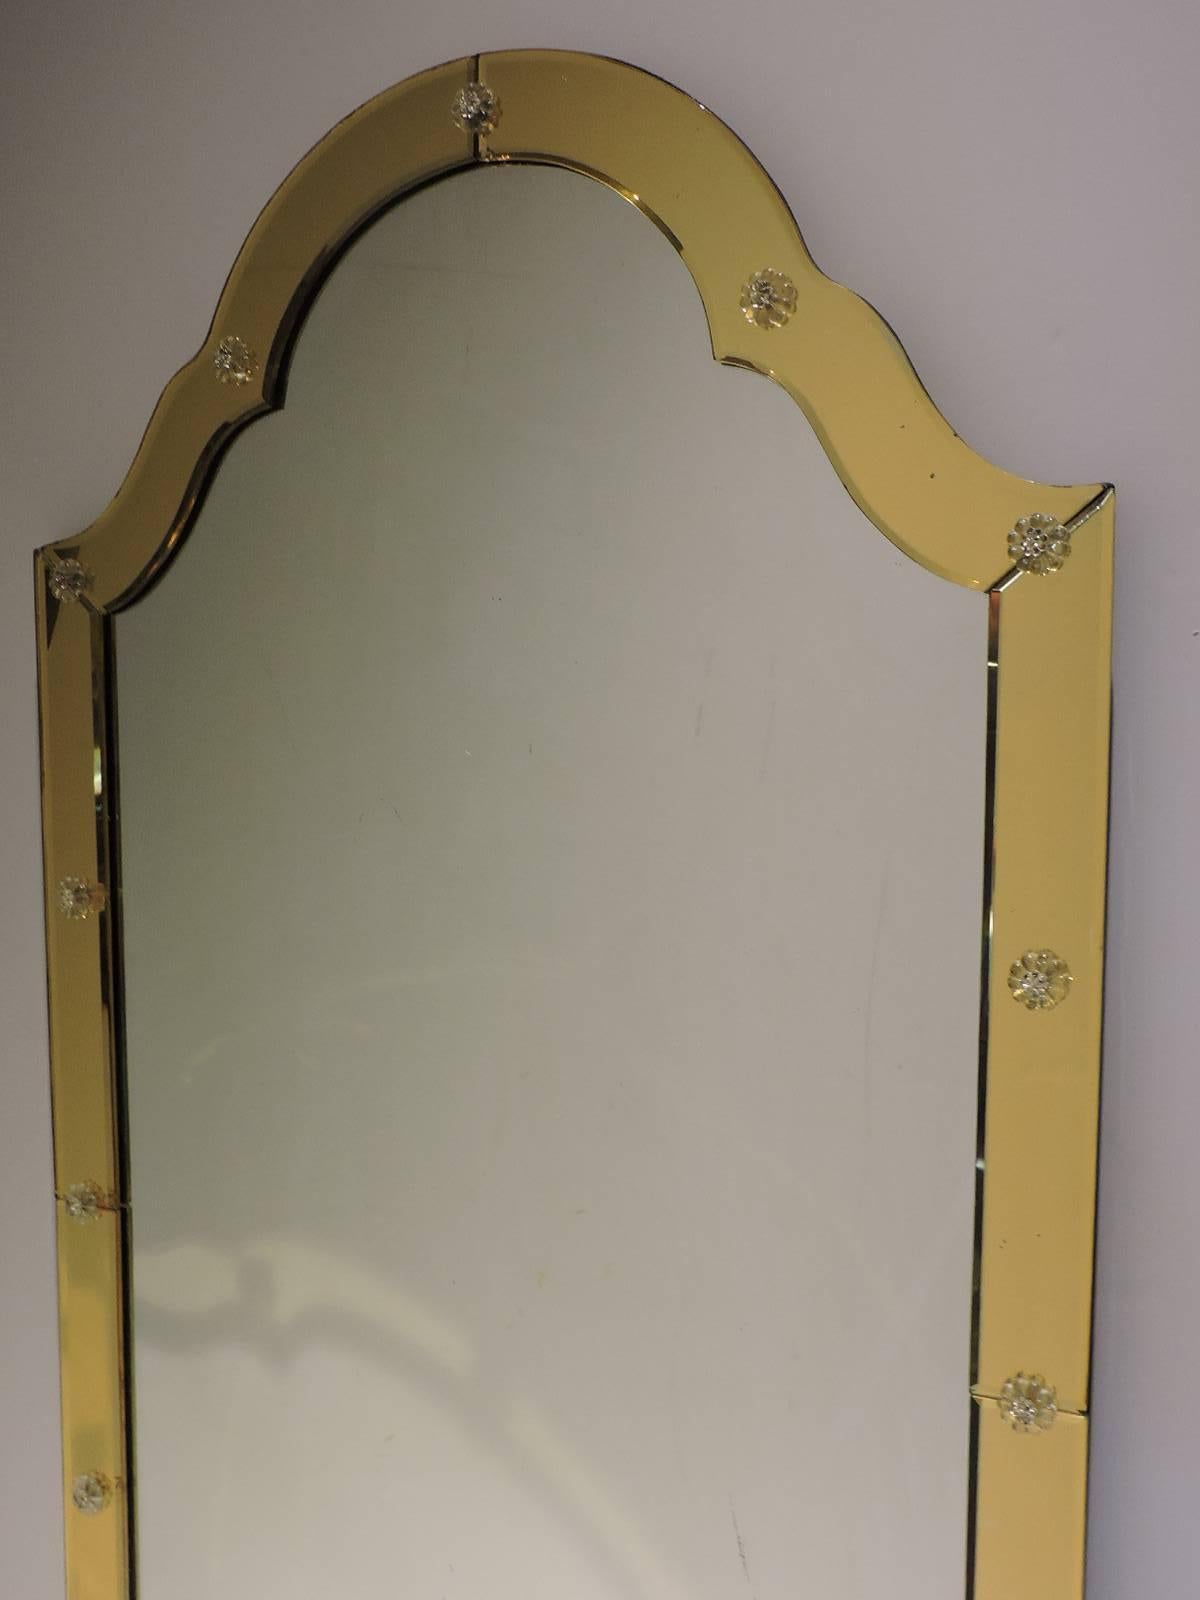 A beautiful Minimalist designed scrolled archtop golden amber Venetian glass mirror with clear rosette decorated framework. Very good quality, circa 1960s.